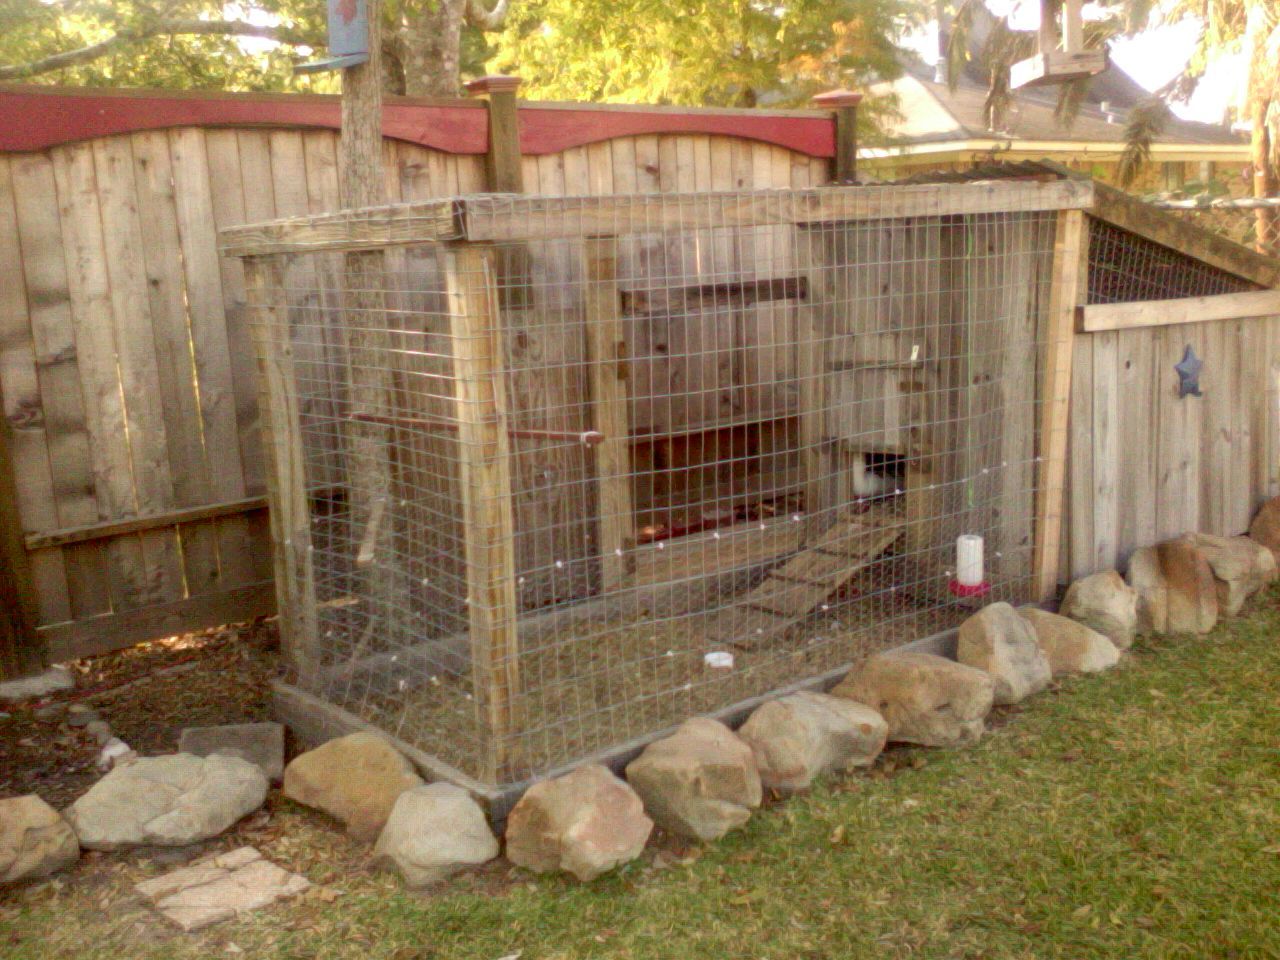 PLEASE help a newbie get a cheap coop/plans or ANY OTHER WAY TO KEEP A  CHICKEN IN A SAFE CHEAP ENV. | BackYard Chickens - Learn How to Raise  Chickens